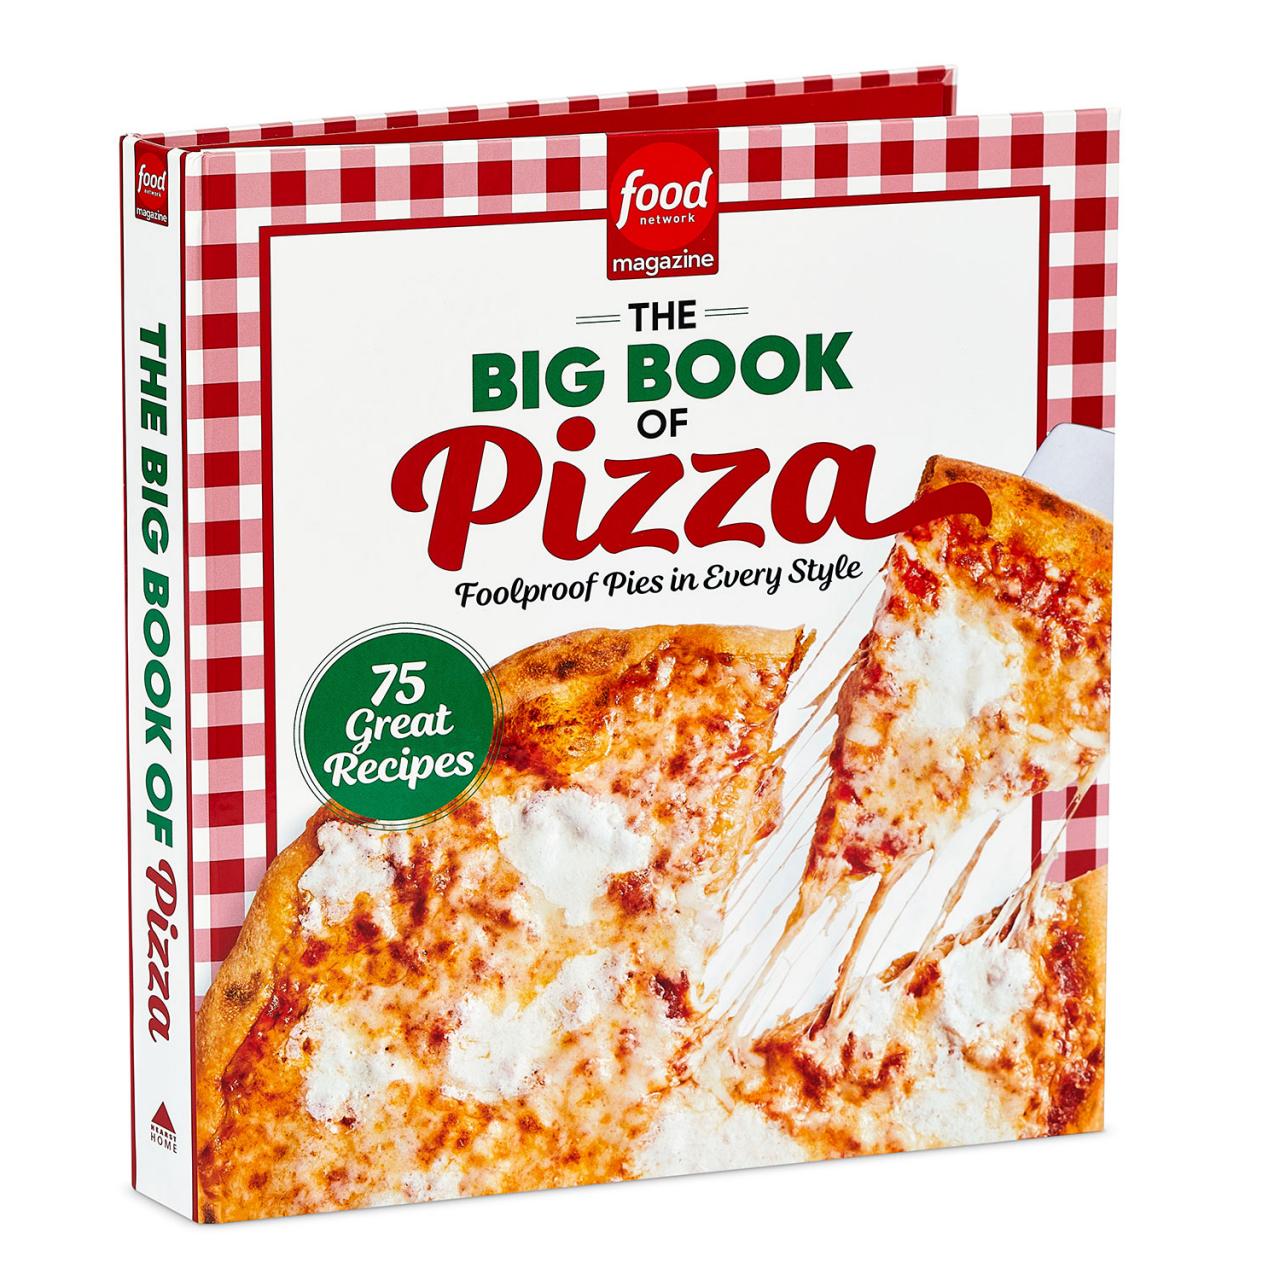 Quick Guide & Review for Real Good Foods' Pizza + Products - Dr